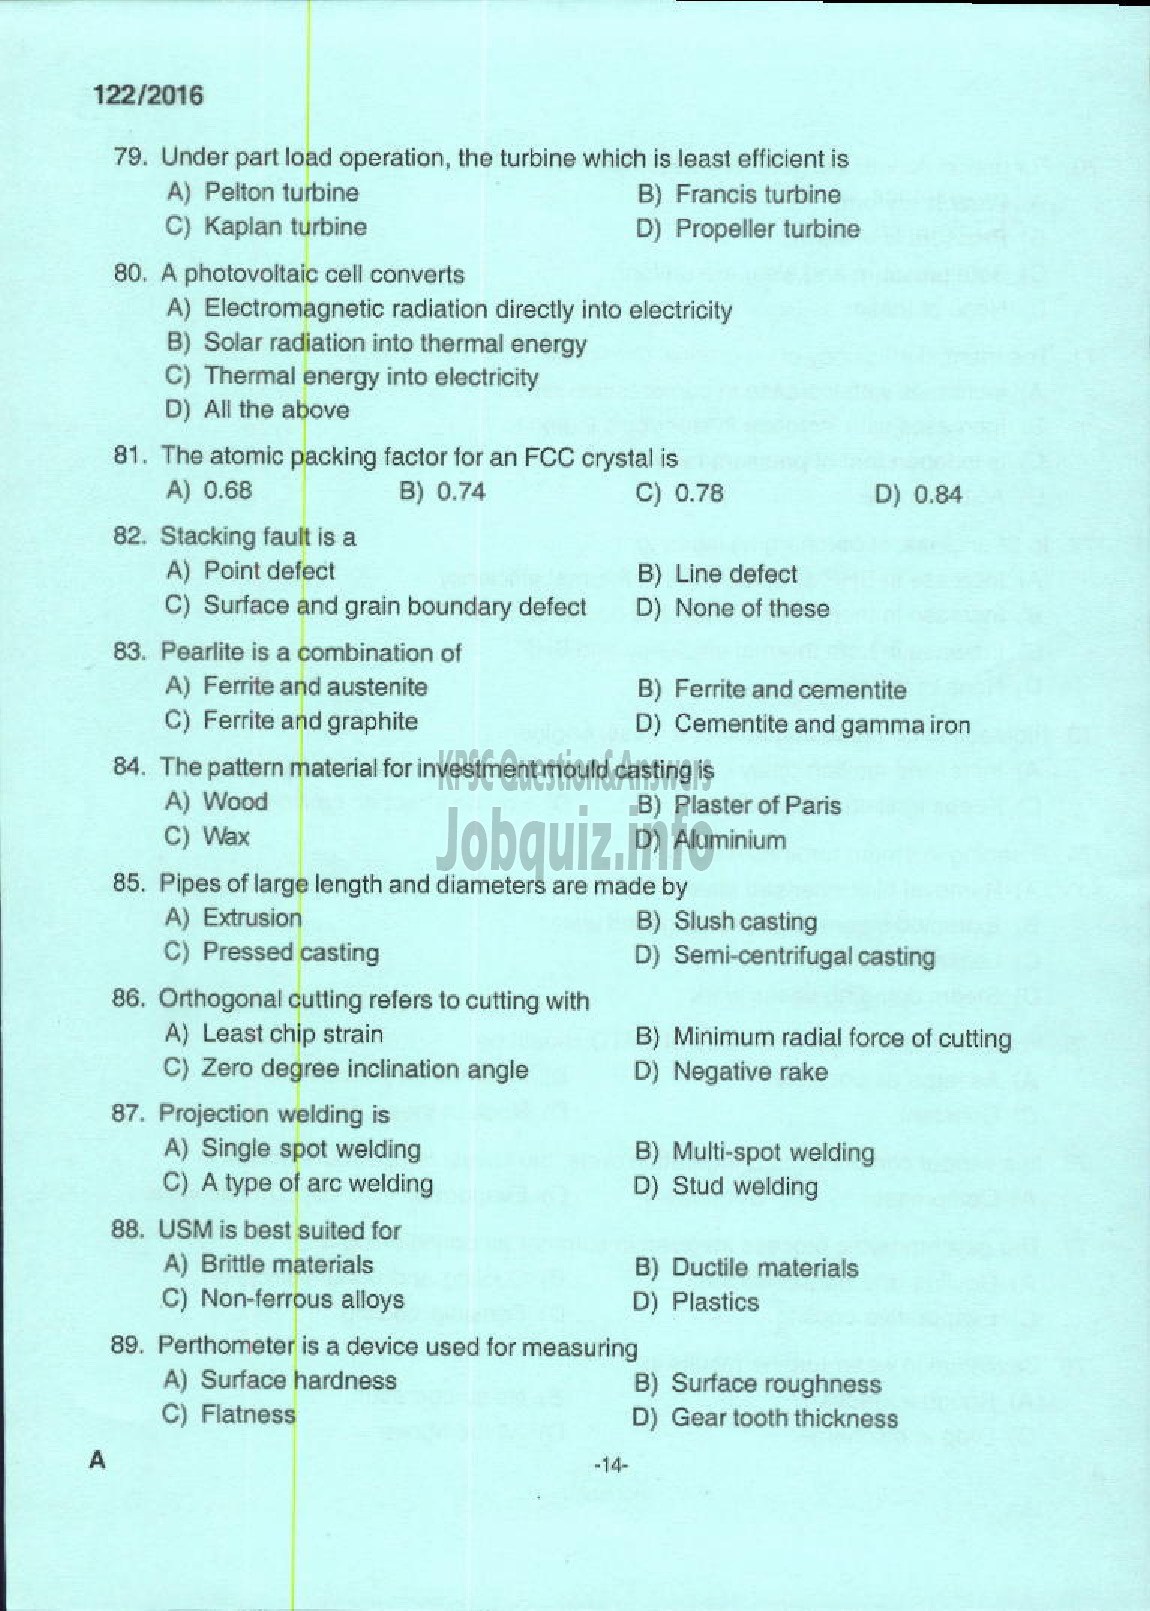 Kerala PSC Question Paper - ASSISTANT PROFESSOR MECHANICAL ENGINEERING TECHNICAL EDUCATION ENGINEERING DCOLLEGES-12